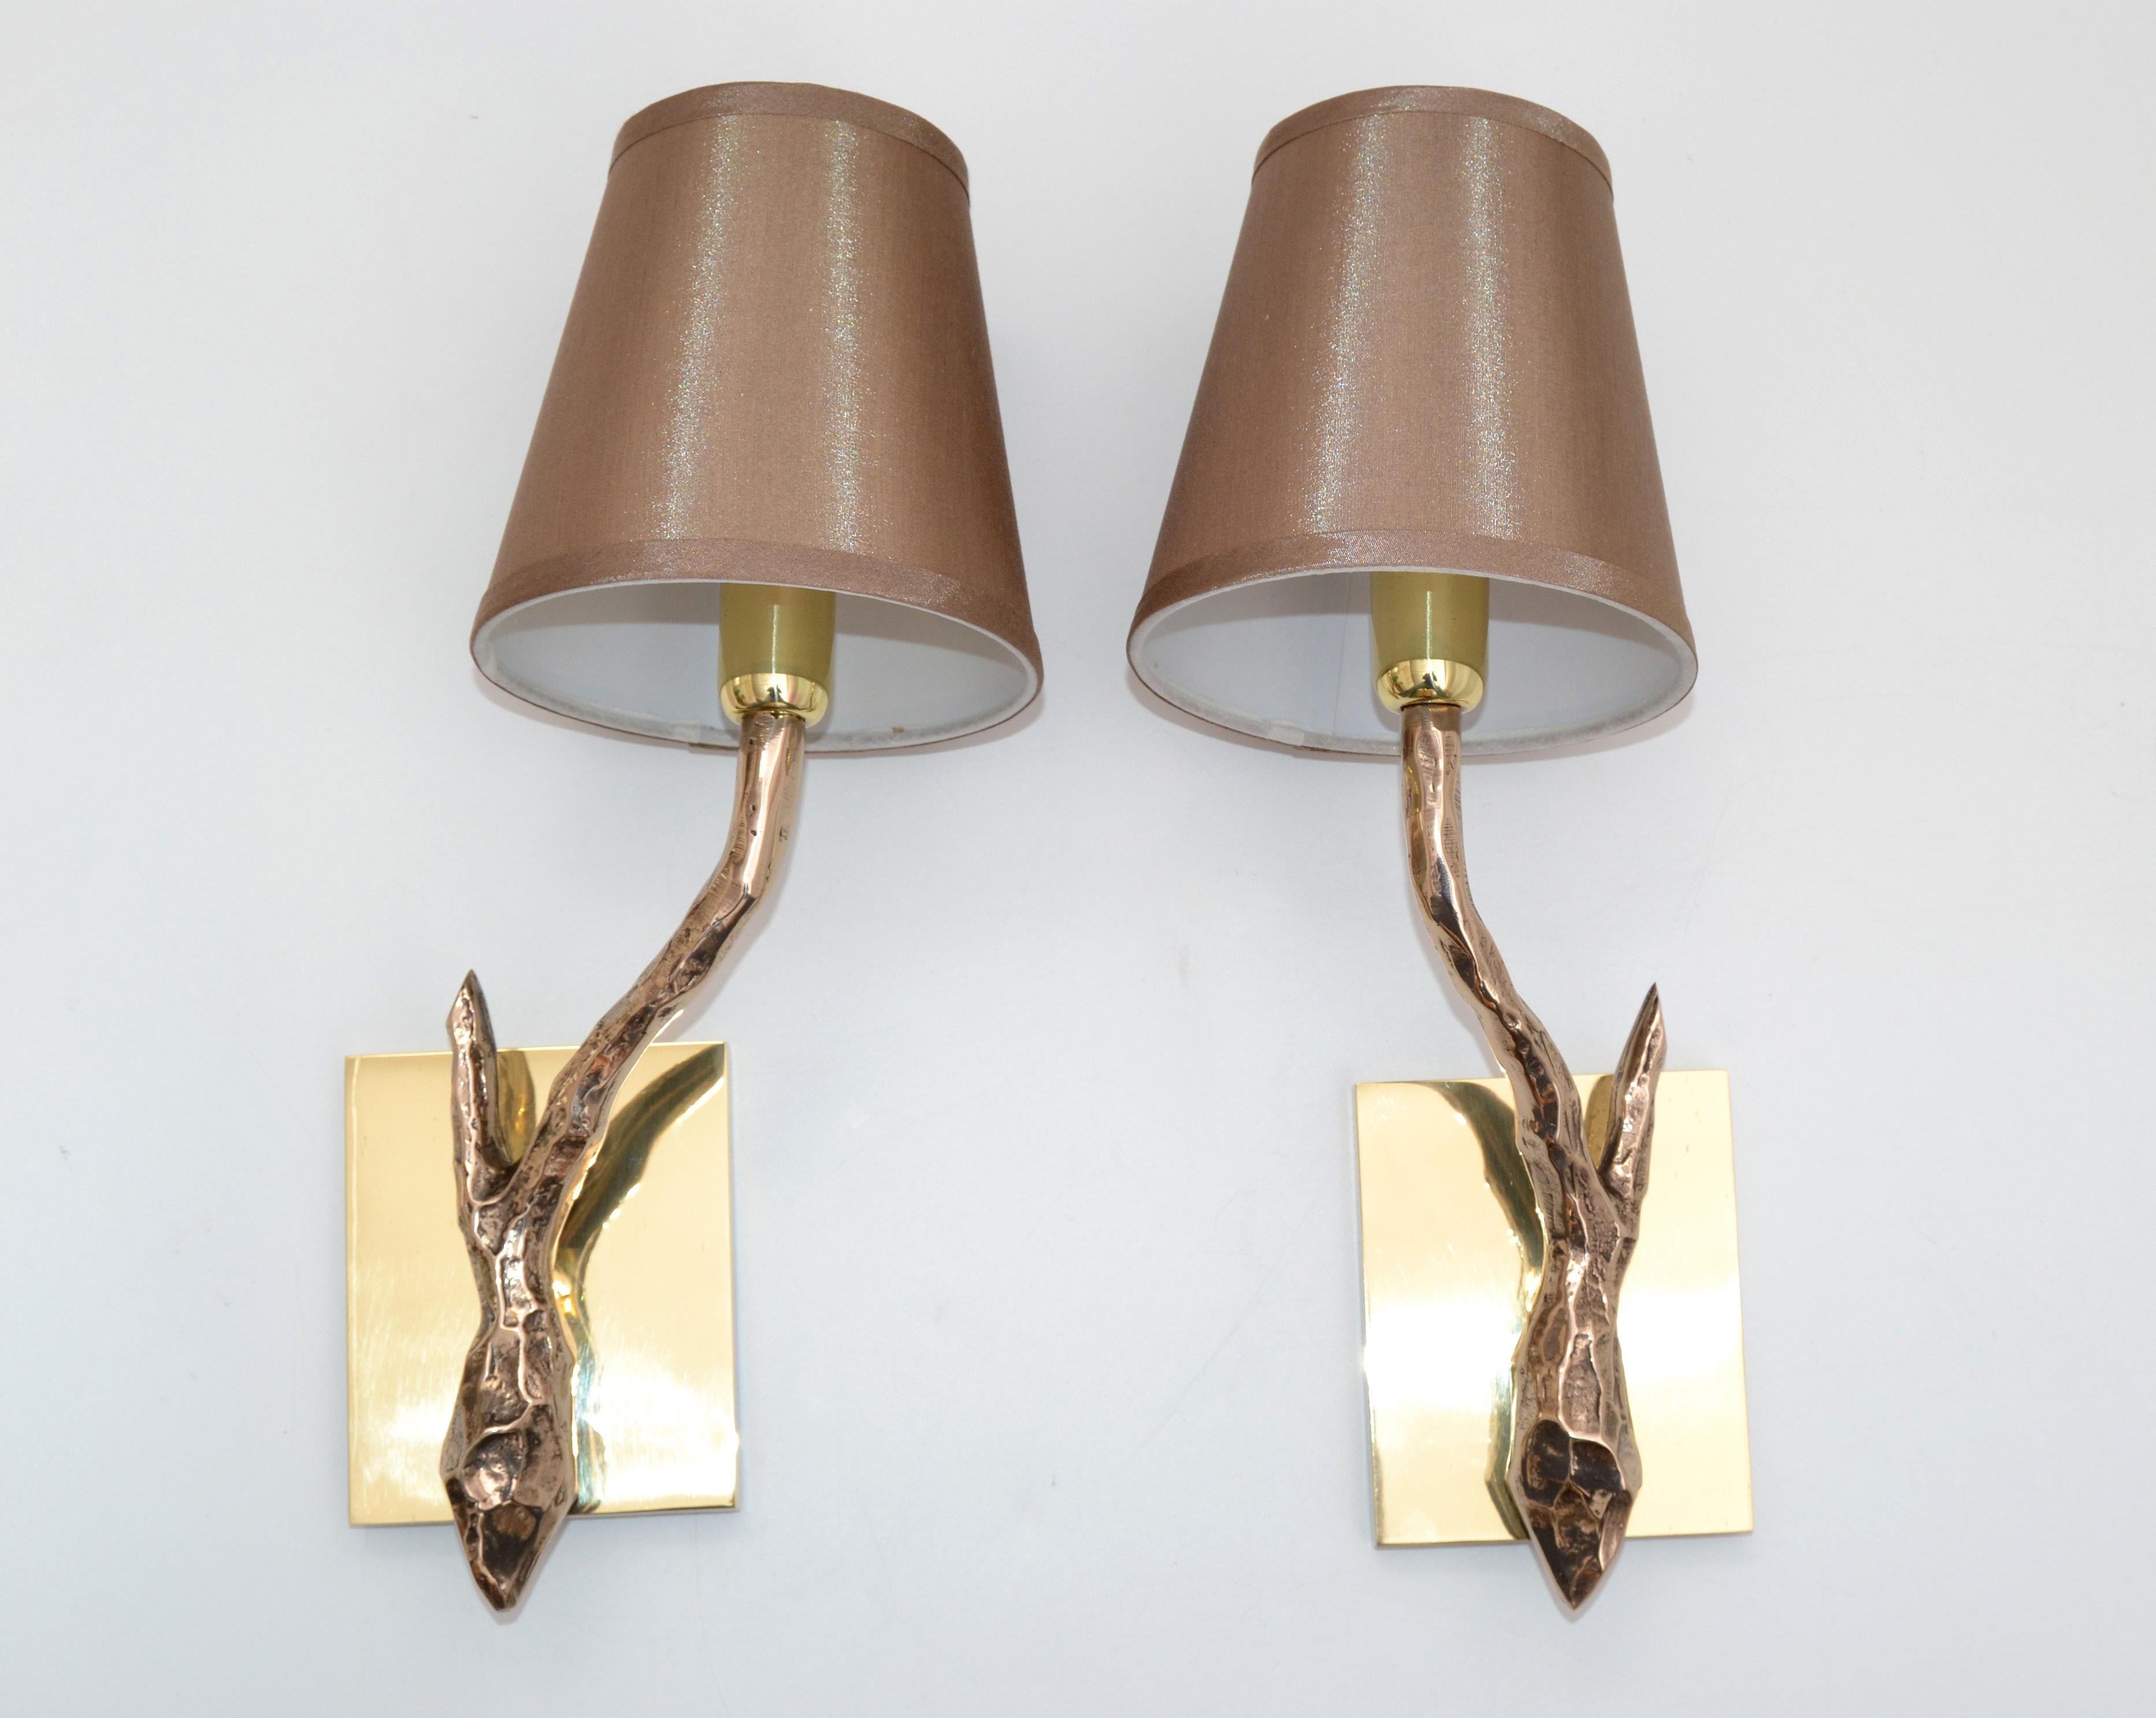 Pair of Agostini Style Sconces Bronze with Gold Metallic Shades, France, 1950s For Sale 7